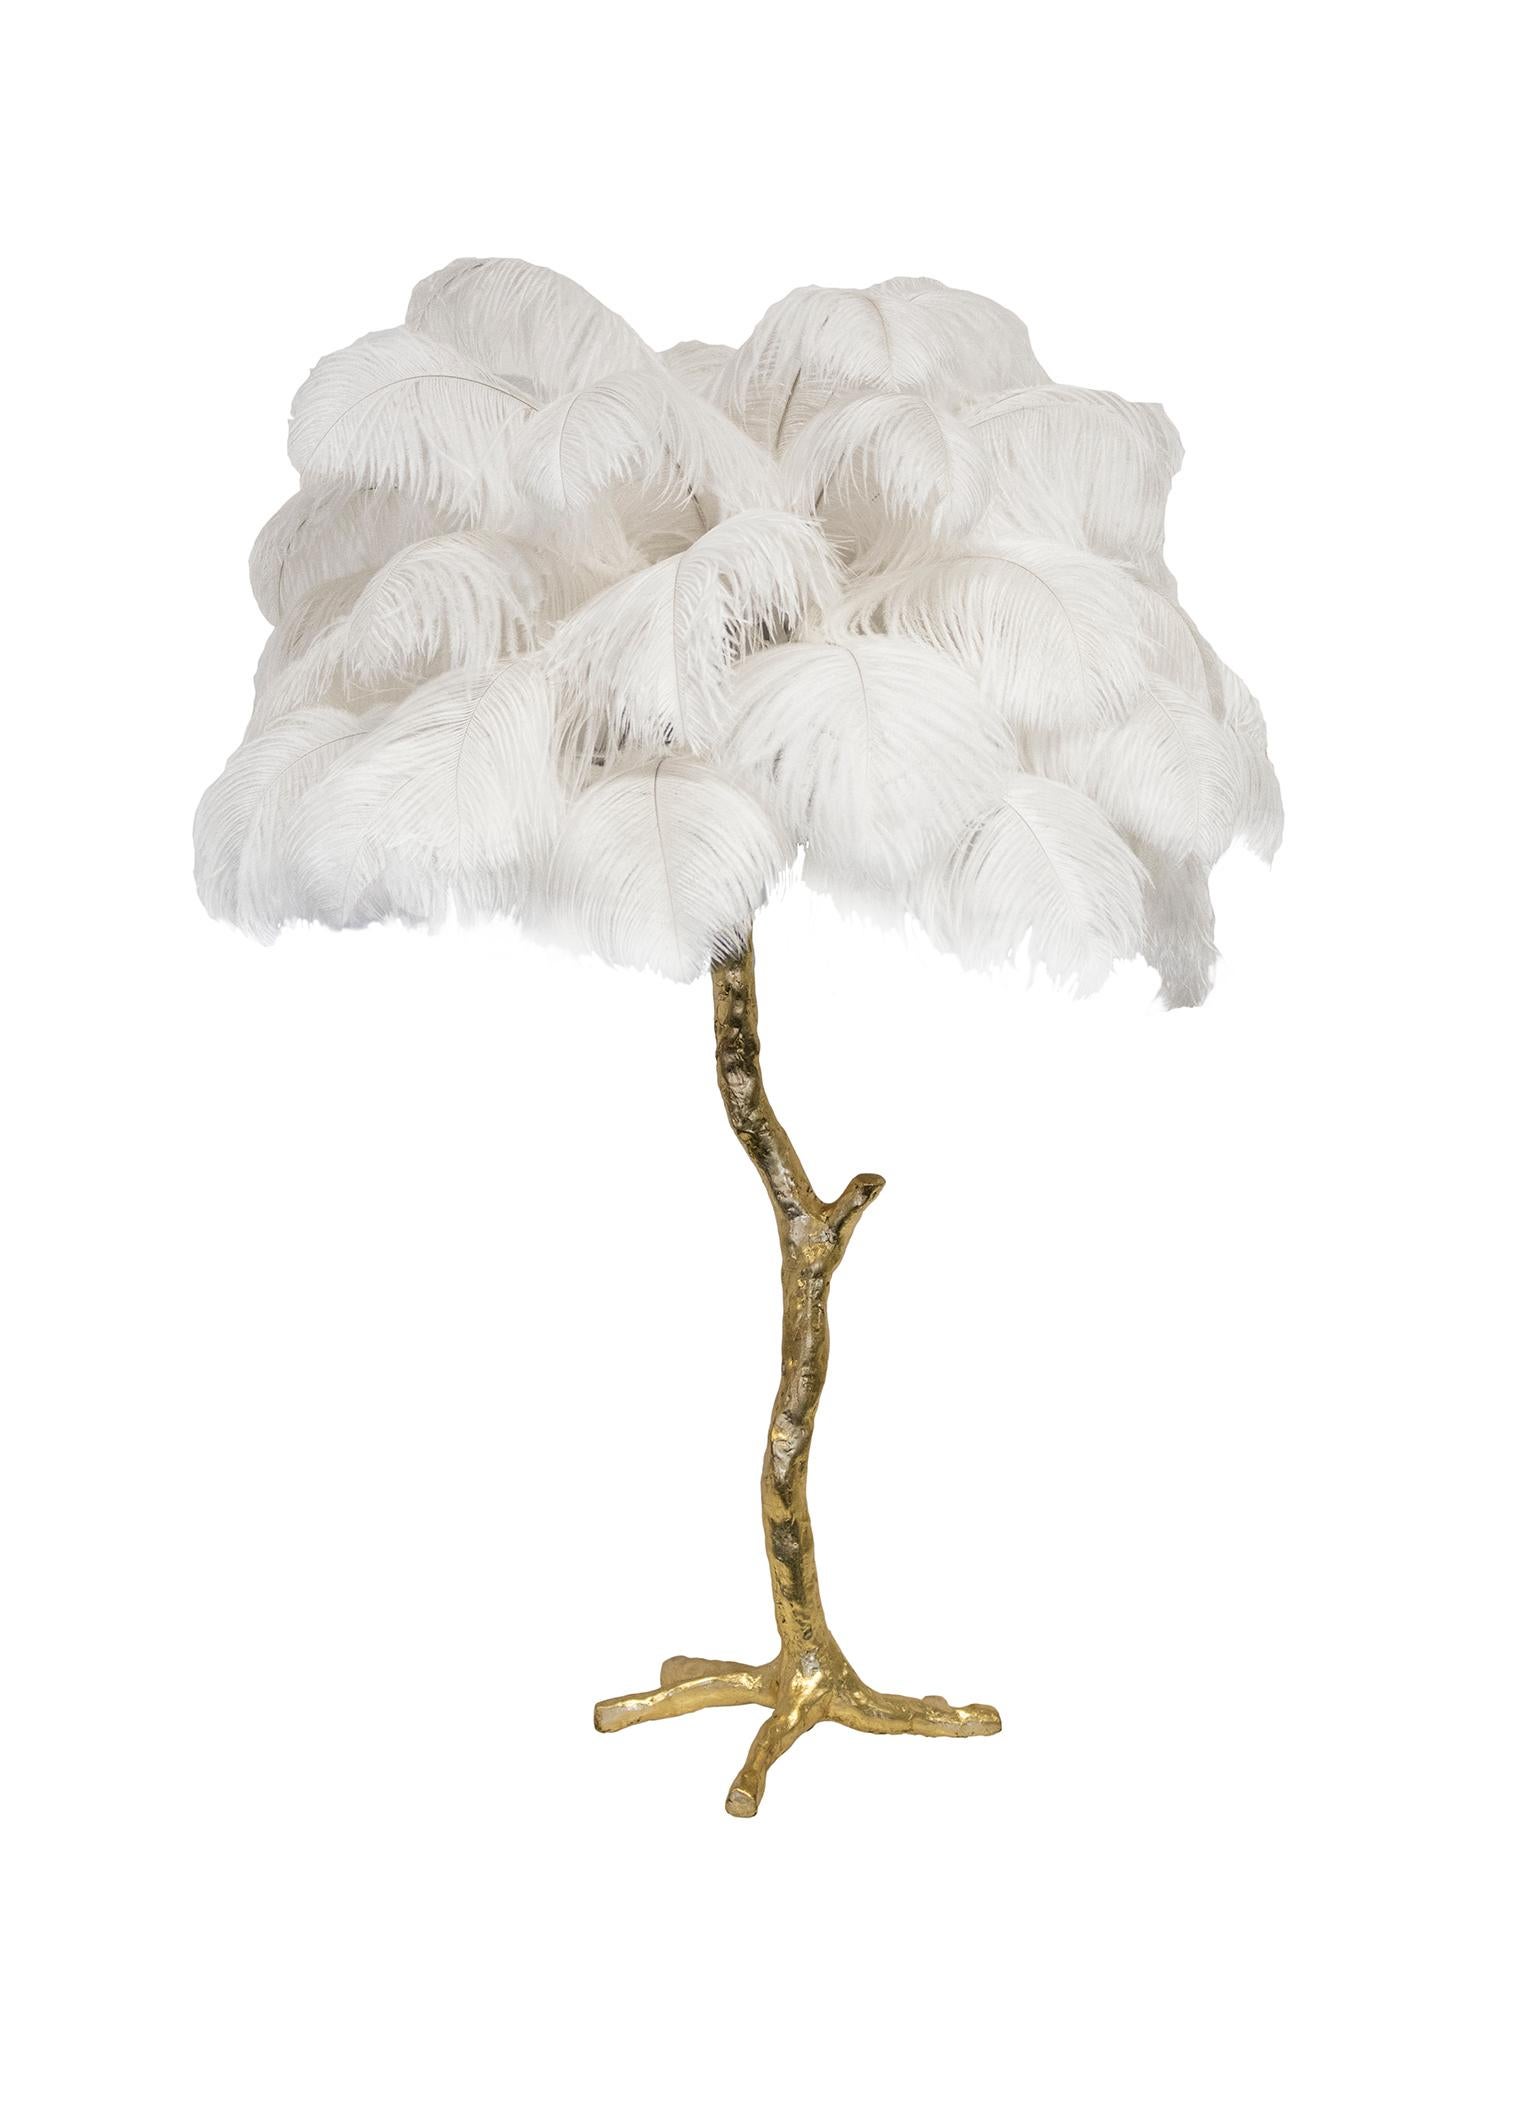 Our feather table lamp is a bijoux version of the exquisite, illuminating Ostrich floor lamp. Each piece delivers a glorious luxurious statement to any design or styling project - perfect in pairs!. 

Ideal for a decadent bedroom or old Hollywood